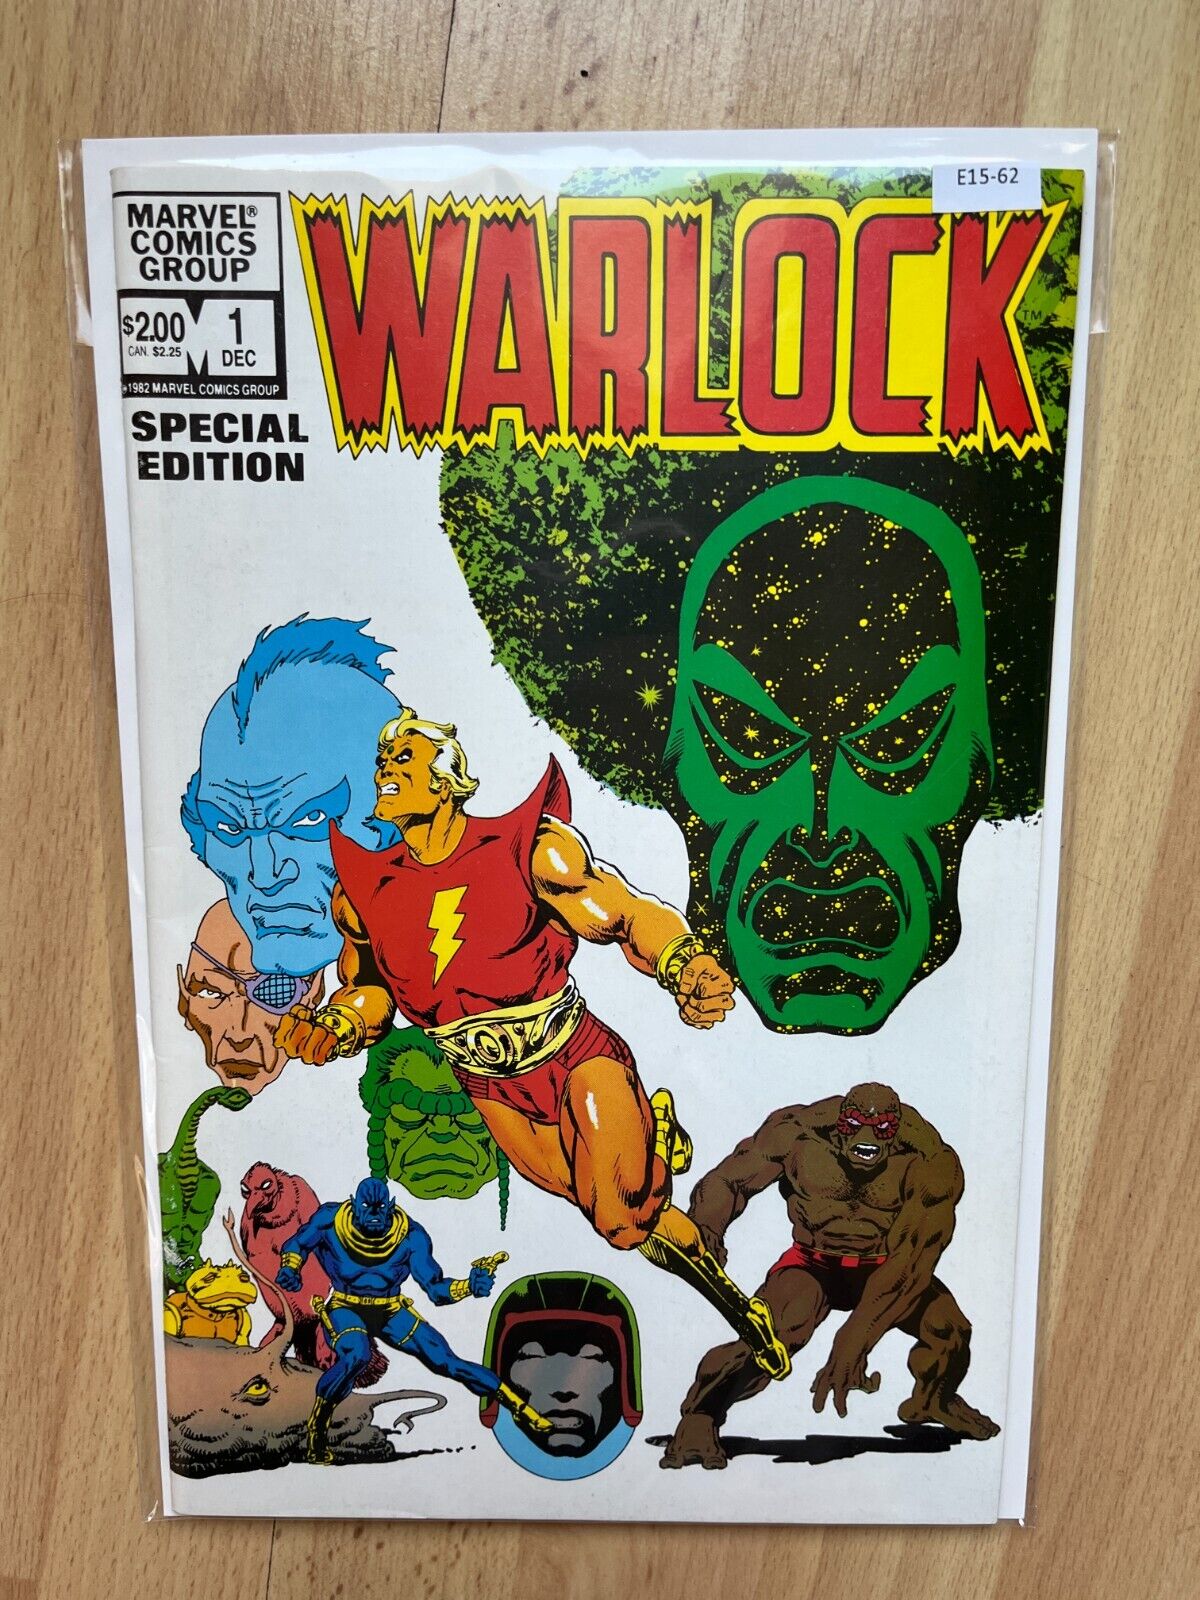 Warlock Special Edition 1 Marvel Comics Group 9.0 E15-62